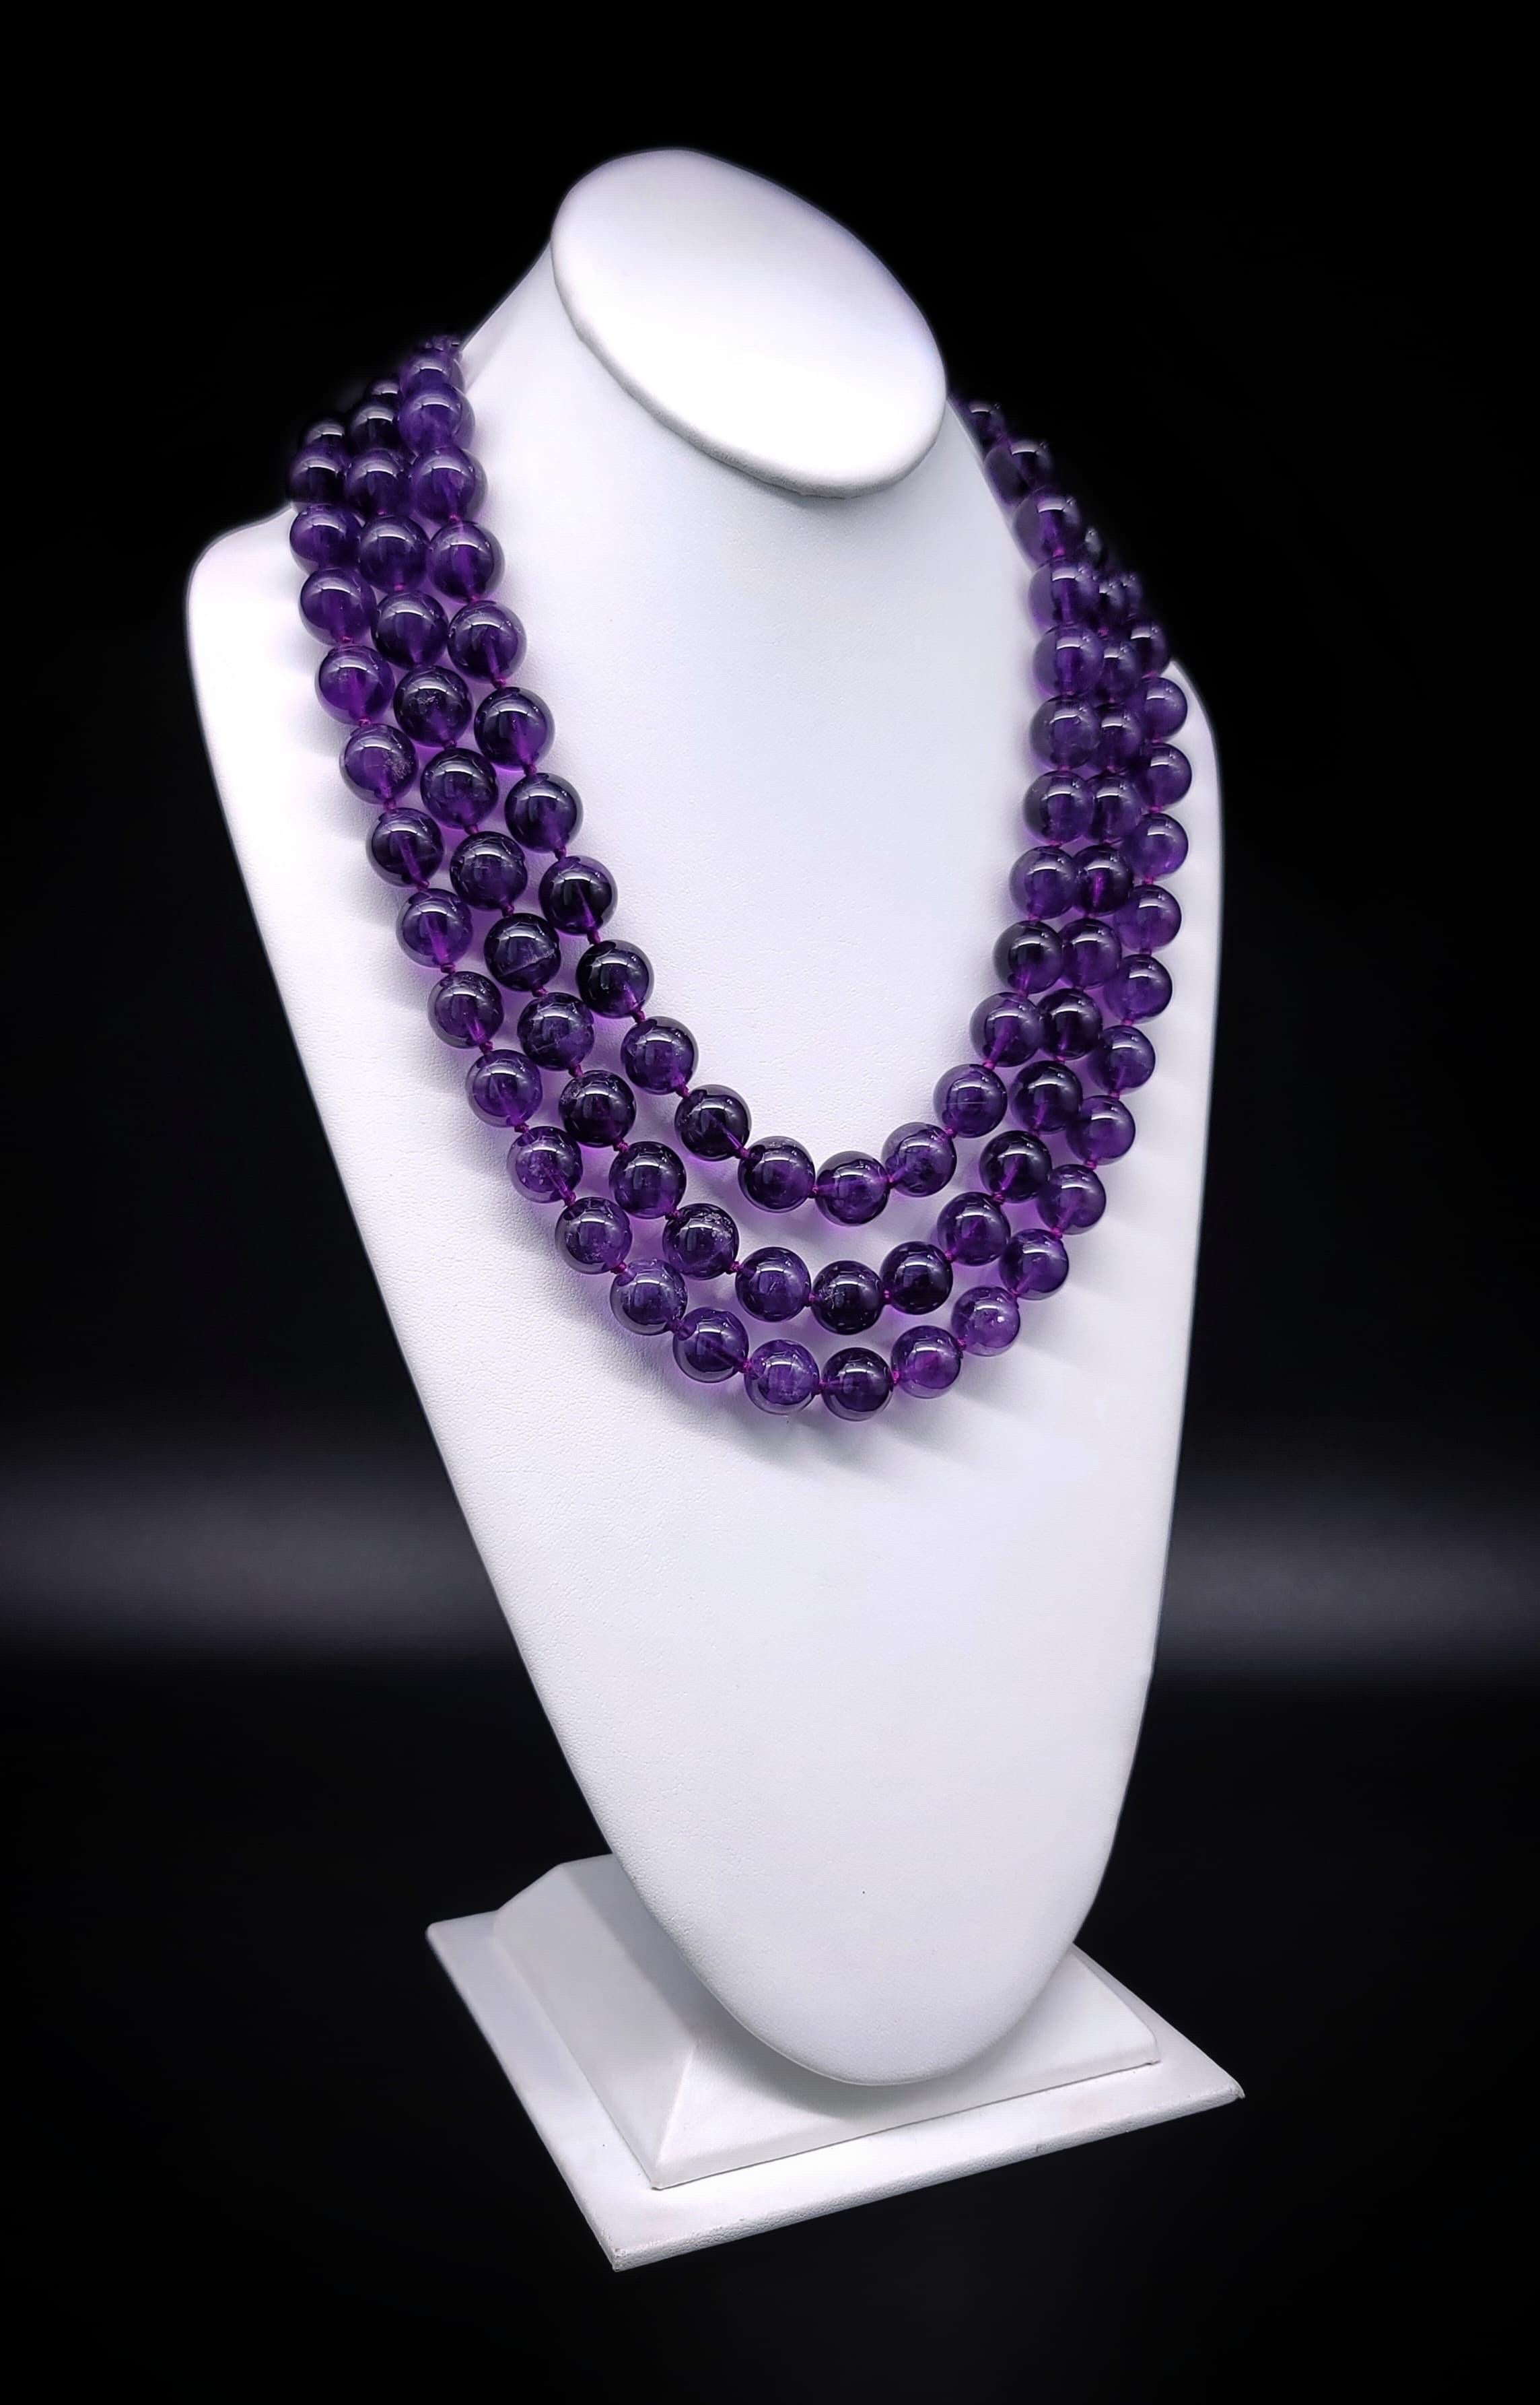 A.Jeschel  Amethyst necklace with a Vintage Venetian glass clasp. 2